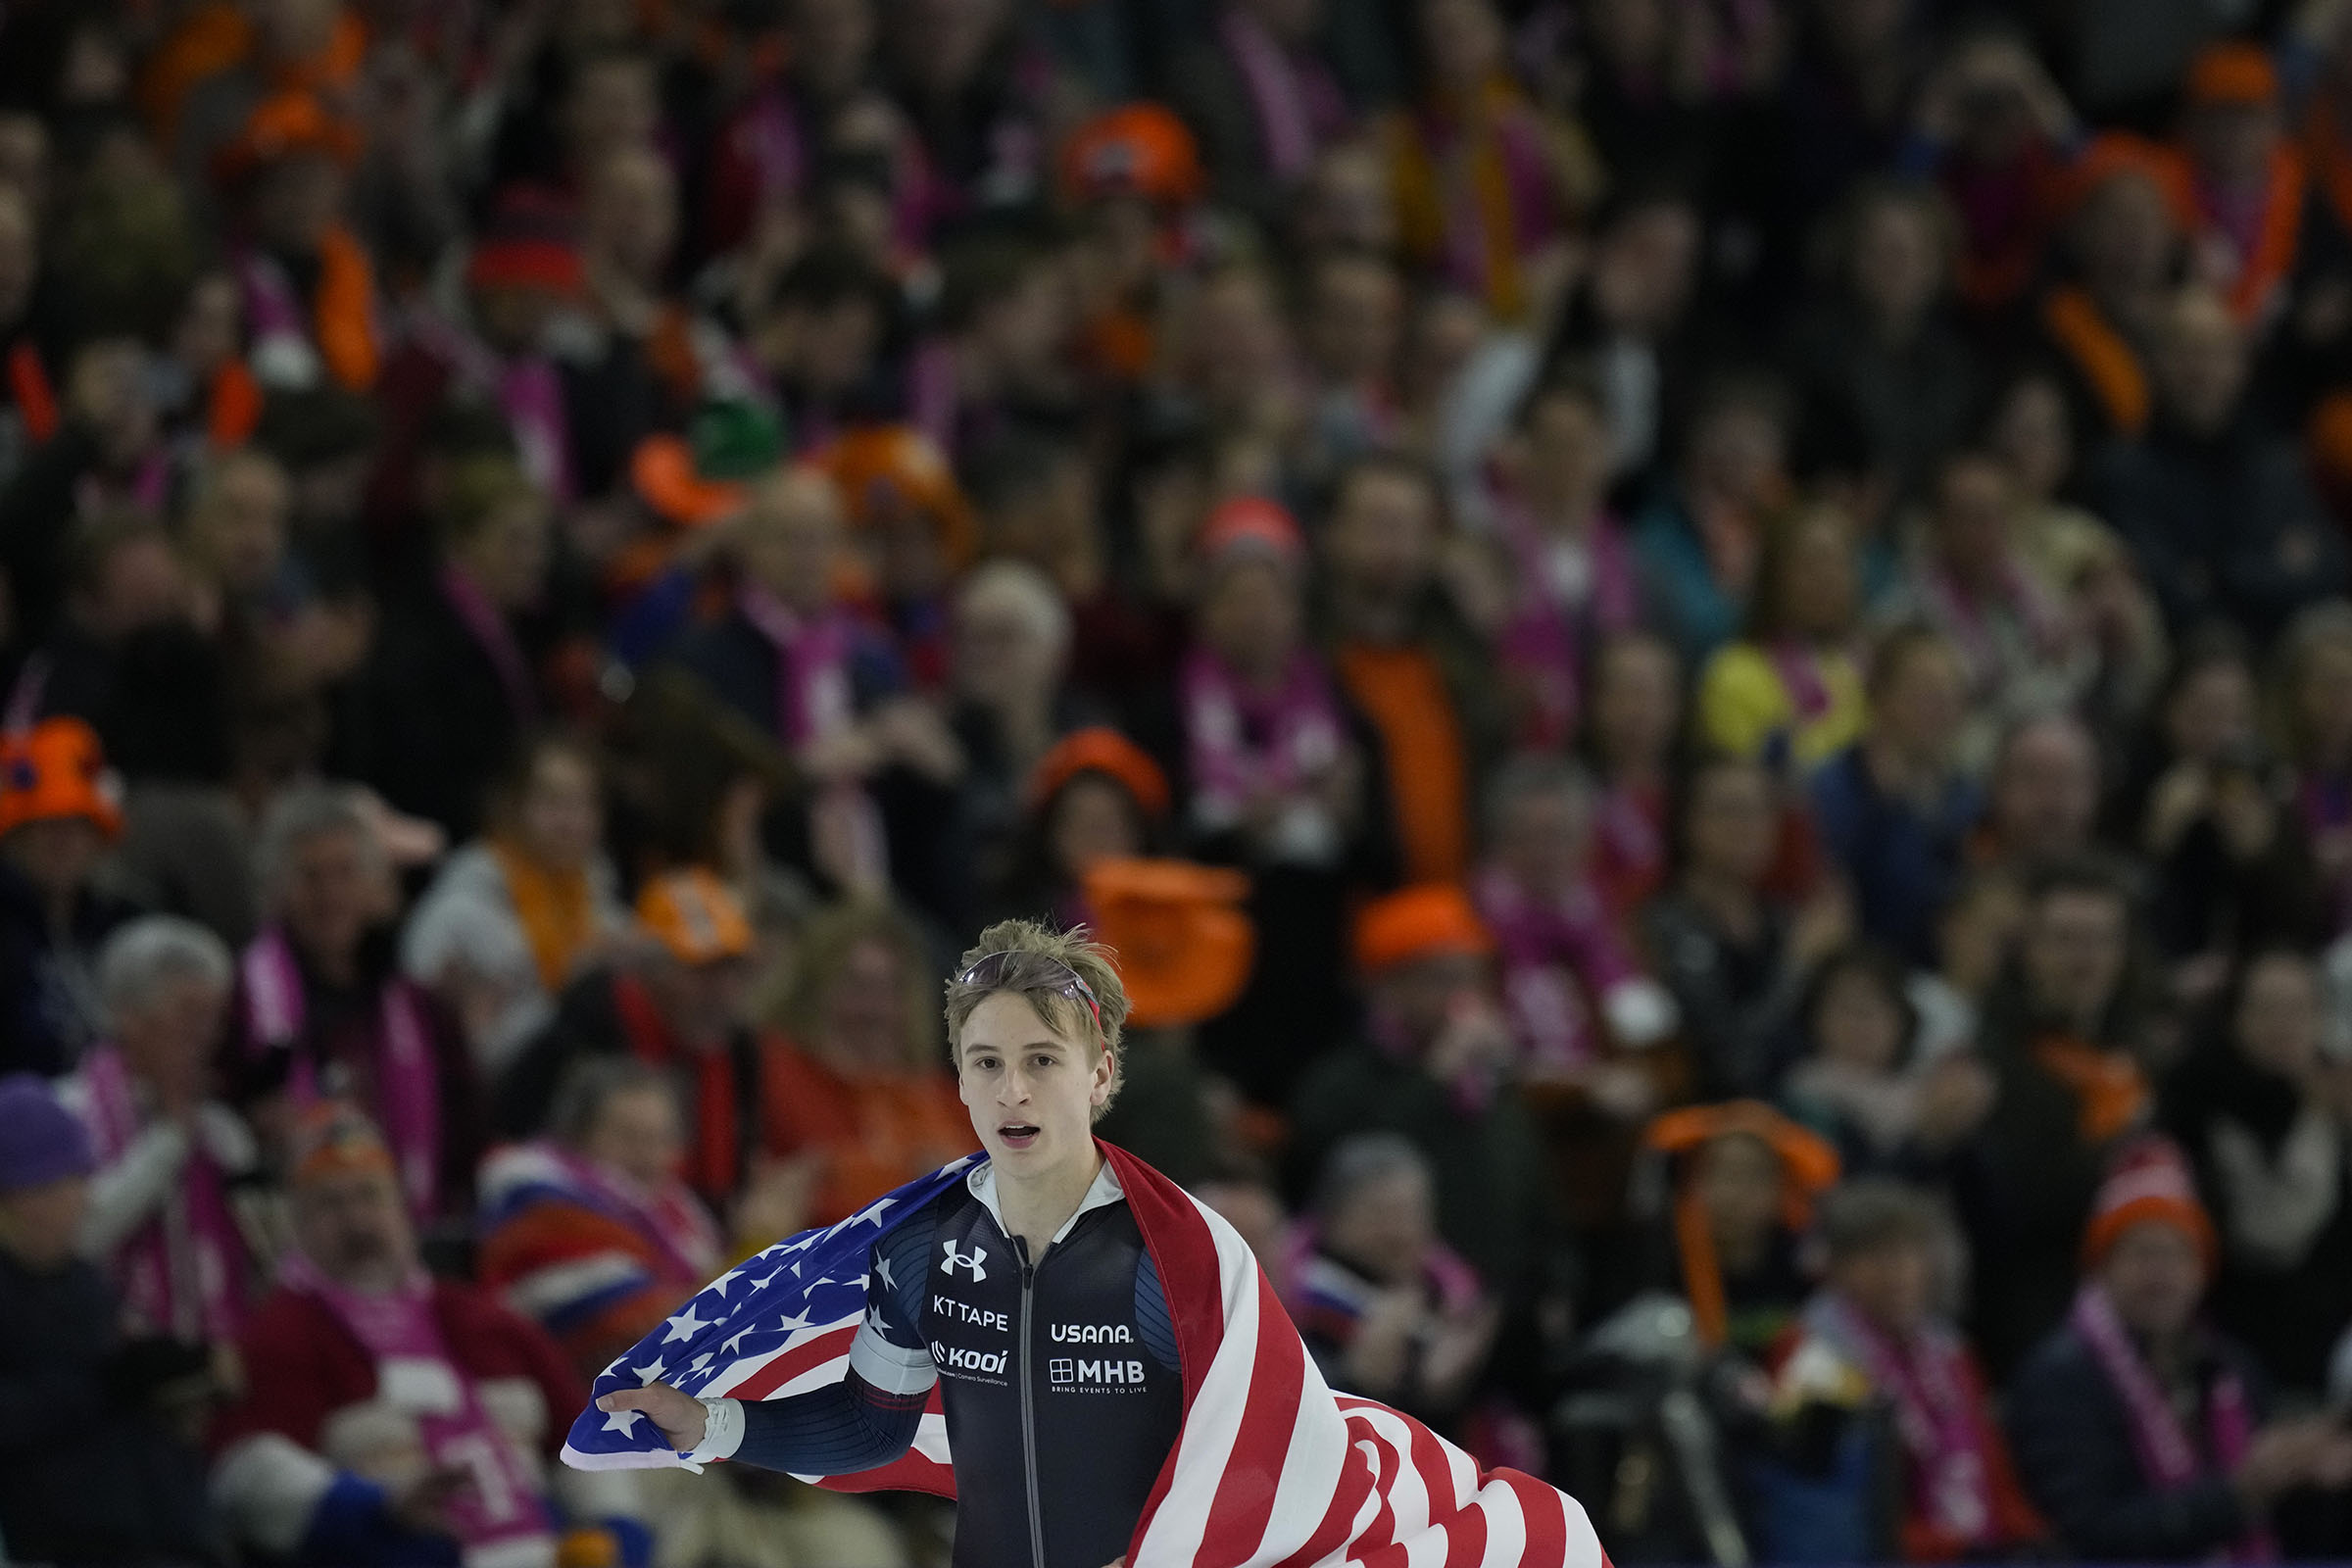 A speedskater holds an American flag in front of a crowd in a Dutch arena following a gold-medal win